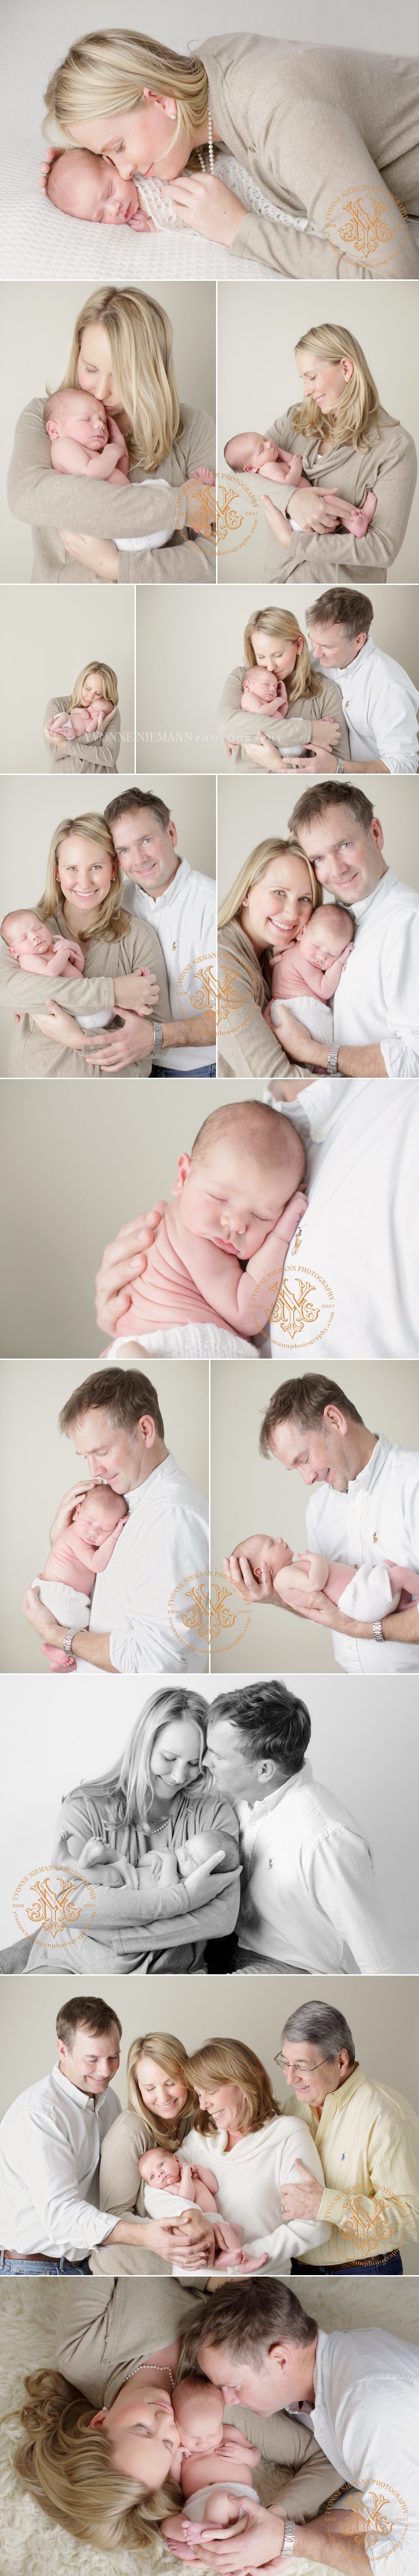 Family connections during Oconee County, GA newborn photography session by Yvonne Niemann Photography.